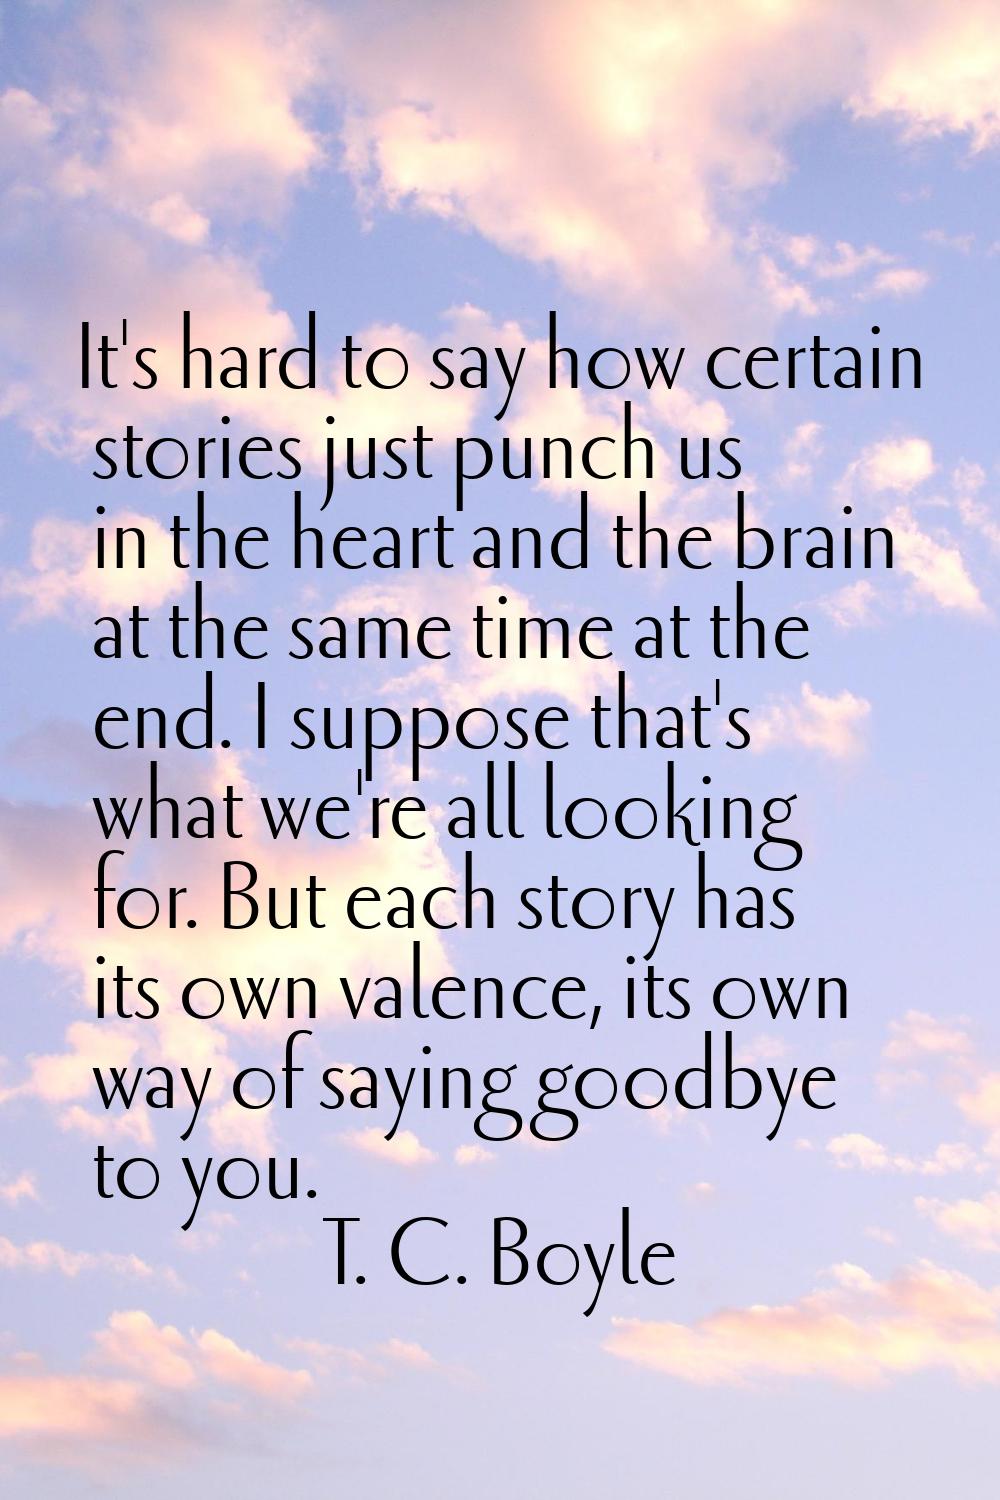 It's hard to say how certain stories just punch us in the heart and the brain at the same time at t